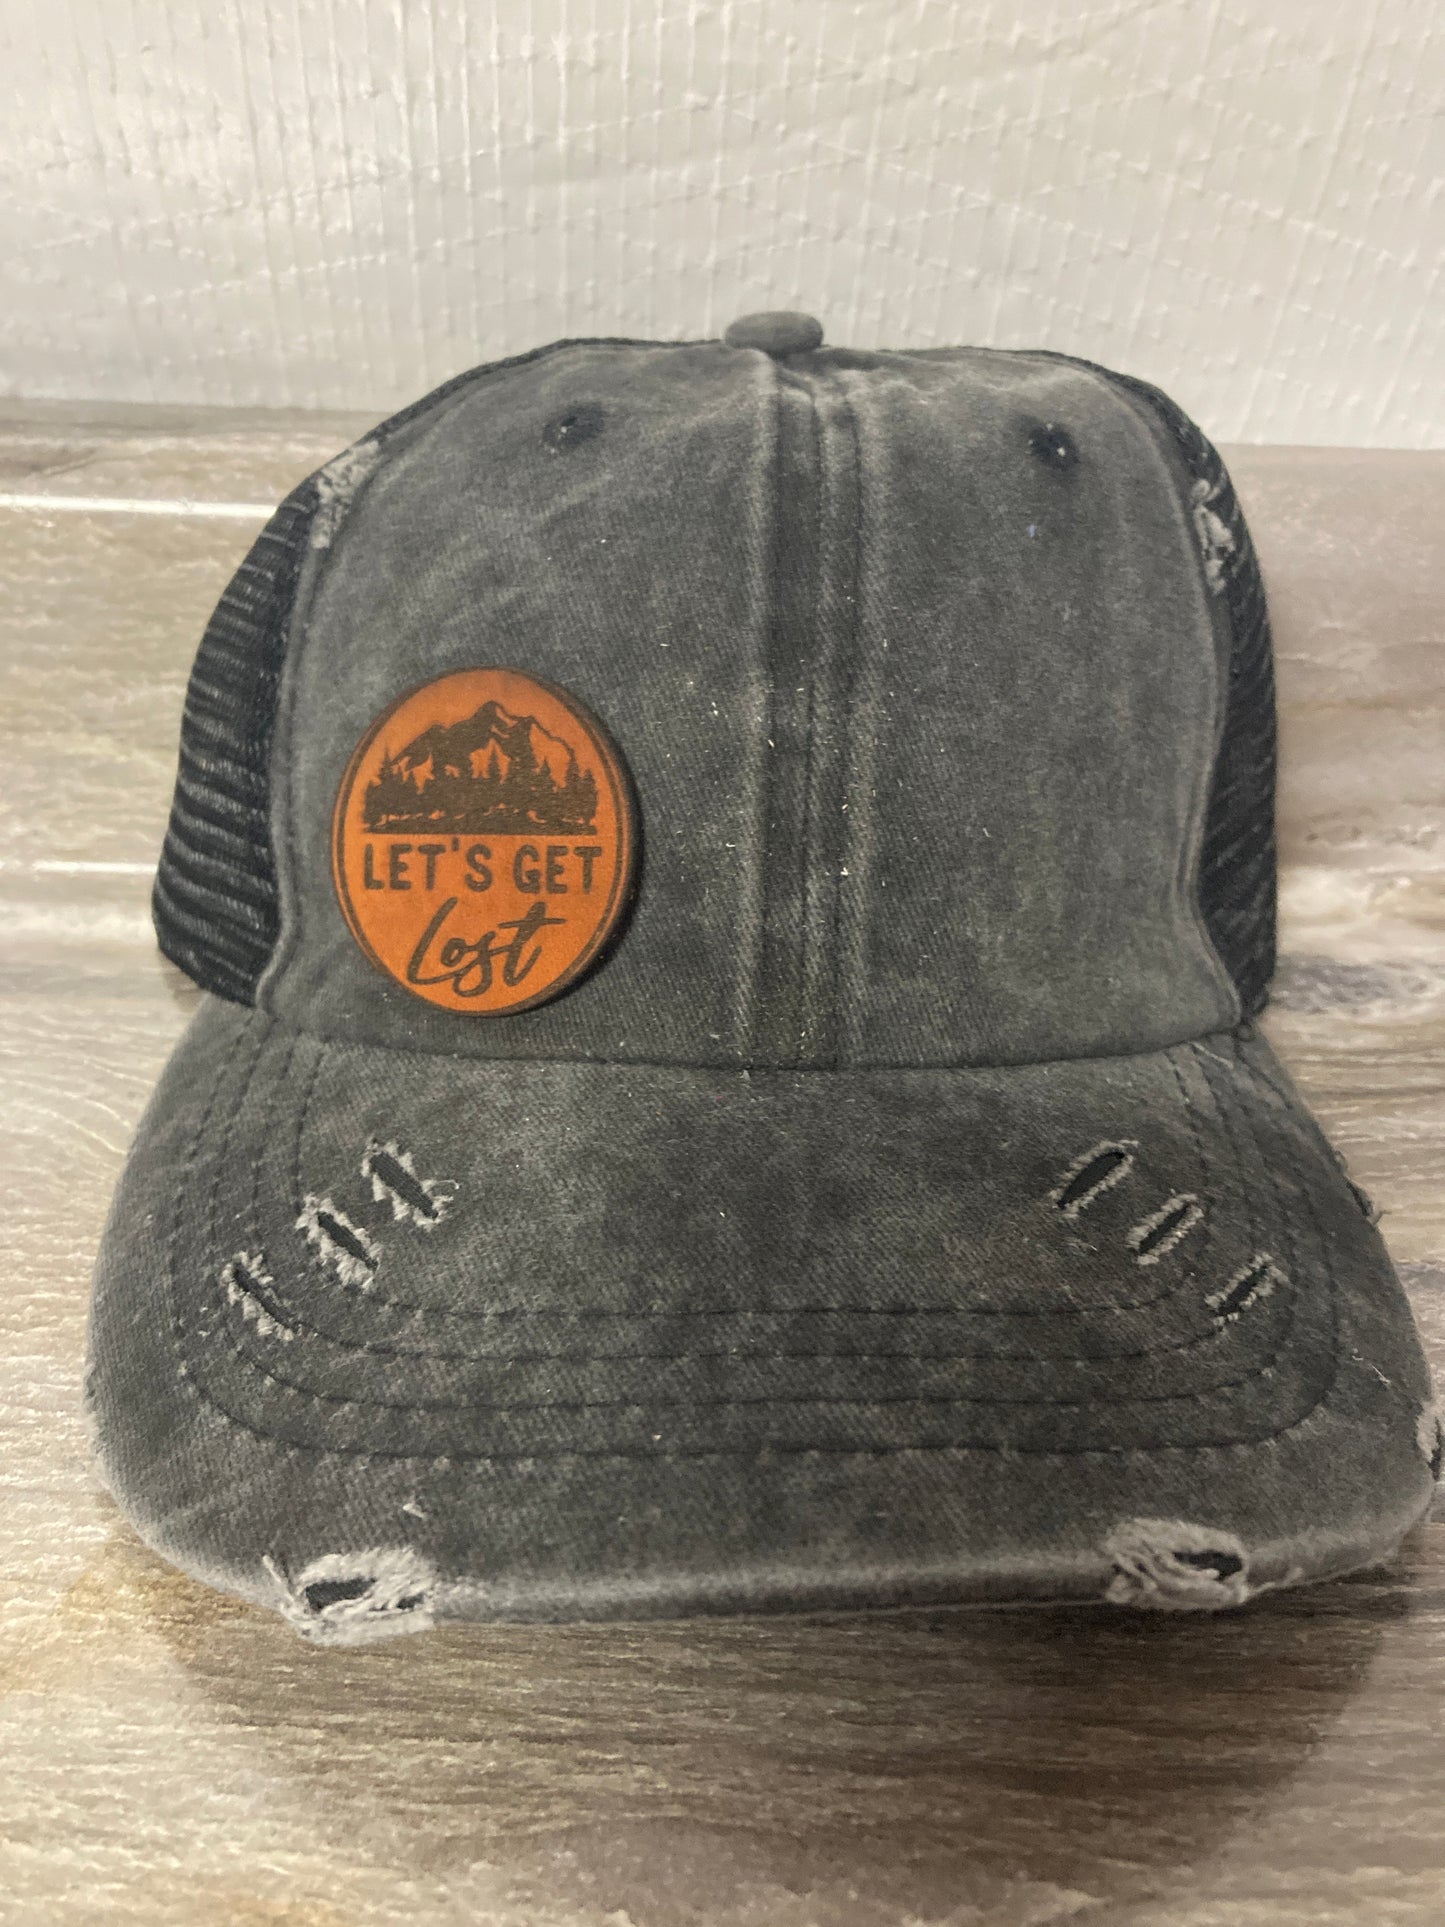 Let's Get Lost Small Leatherette Hat Patch